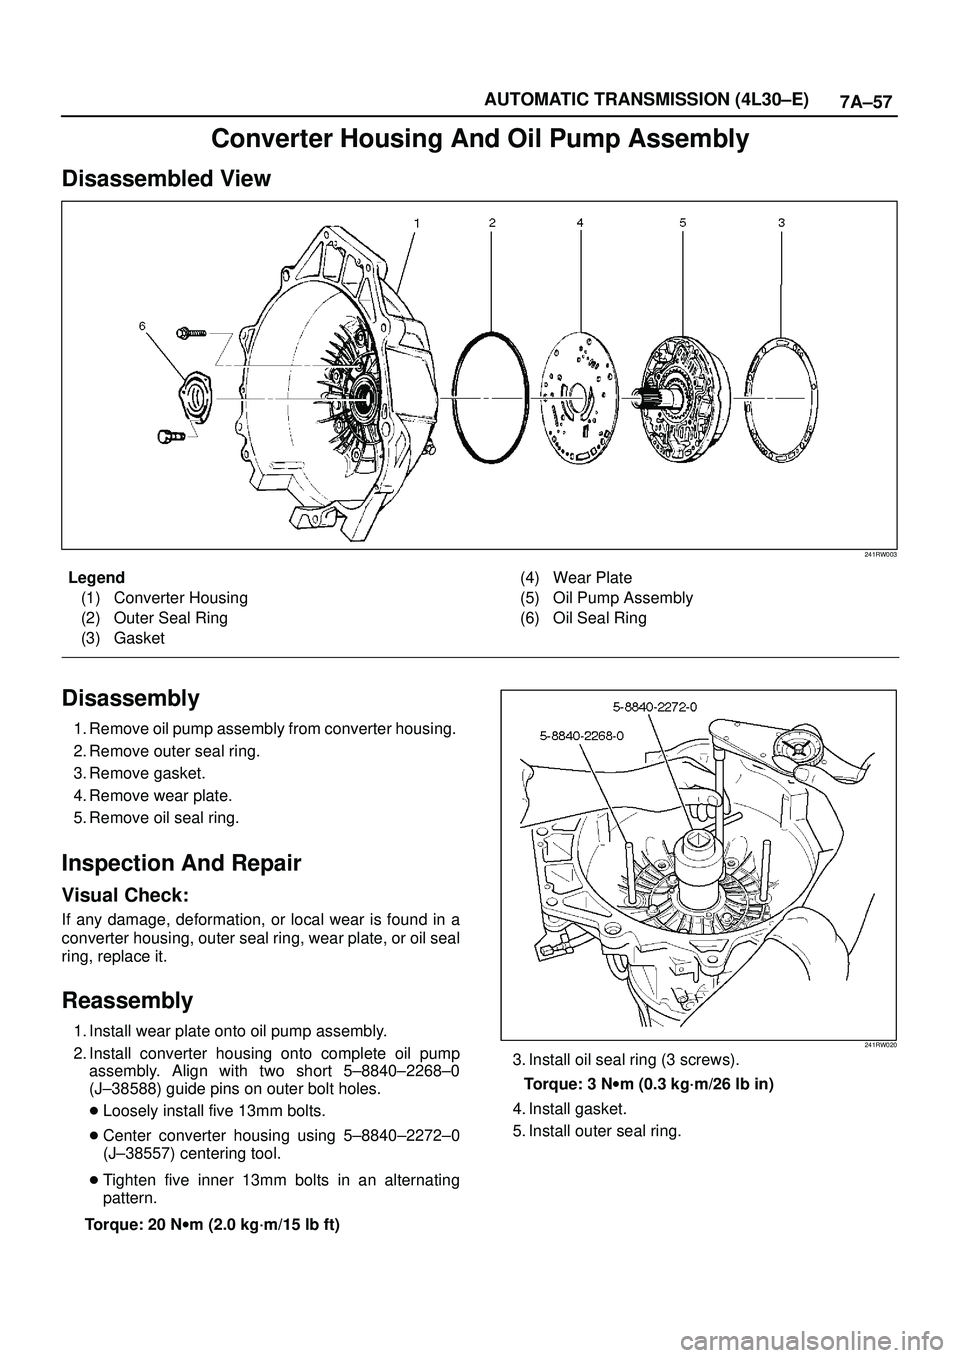 ISUZU TROOPER 1998  Service Repair Manual 7A±57 AUTOMATIC TRANSMISSION (4L30±E)
Converter Housing And Oil Pump Assembly
Disassembled View
241RW003
Legend
(1) Converter Housing
(2) Outer Seal Ring
(3) Gasket(4) Wear Plate
(5) Oil Pump Assemb